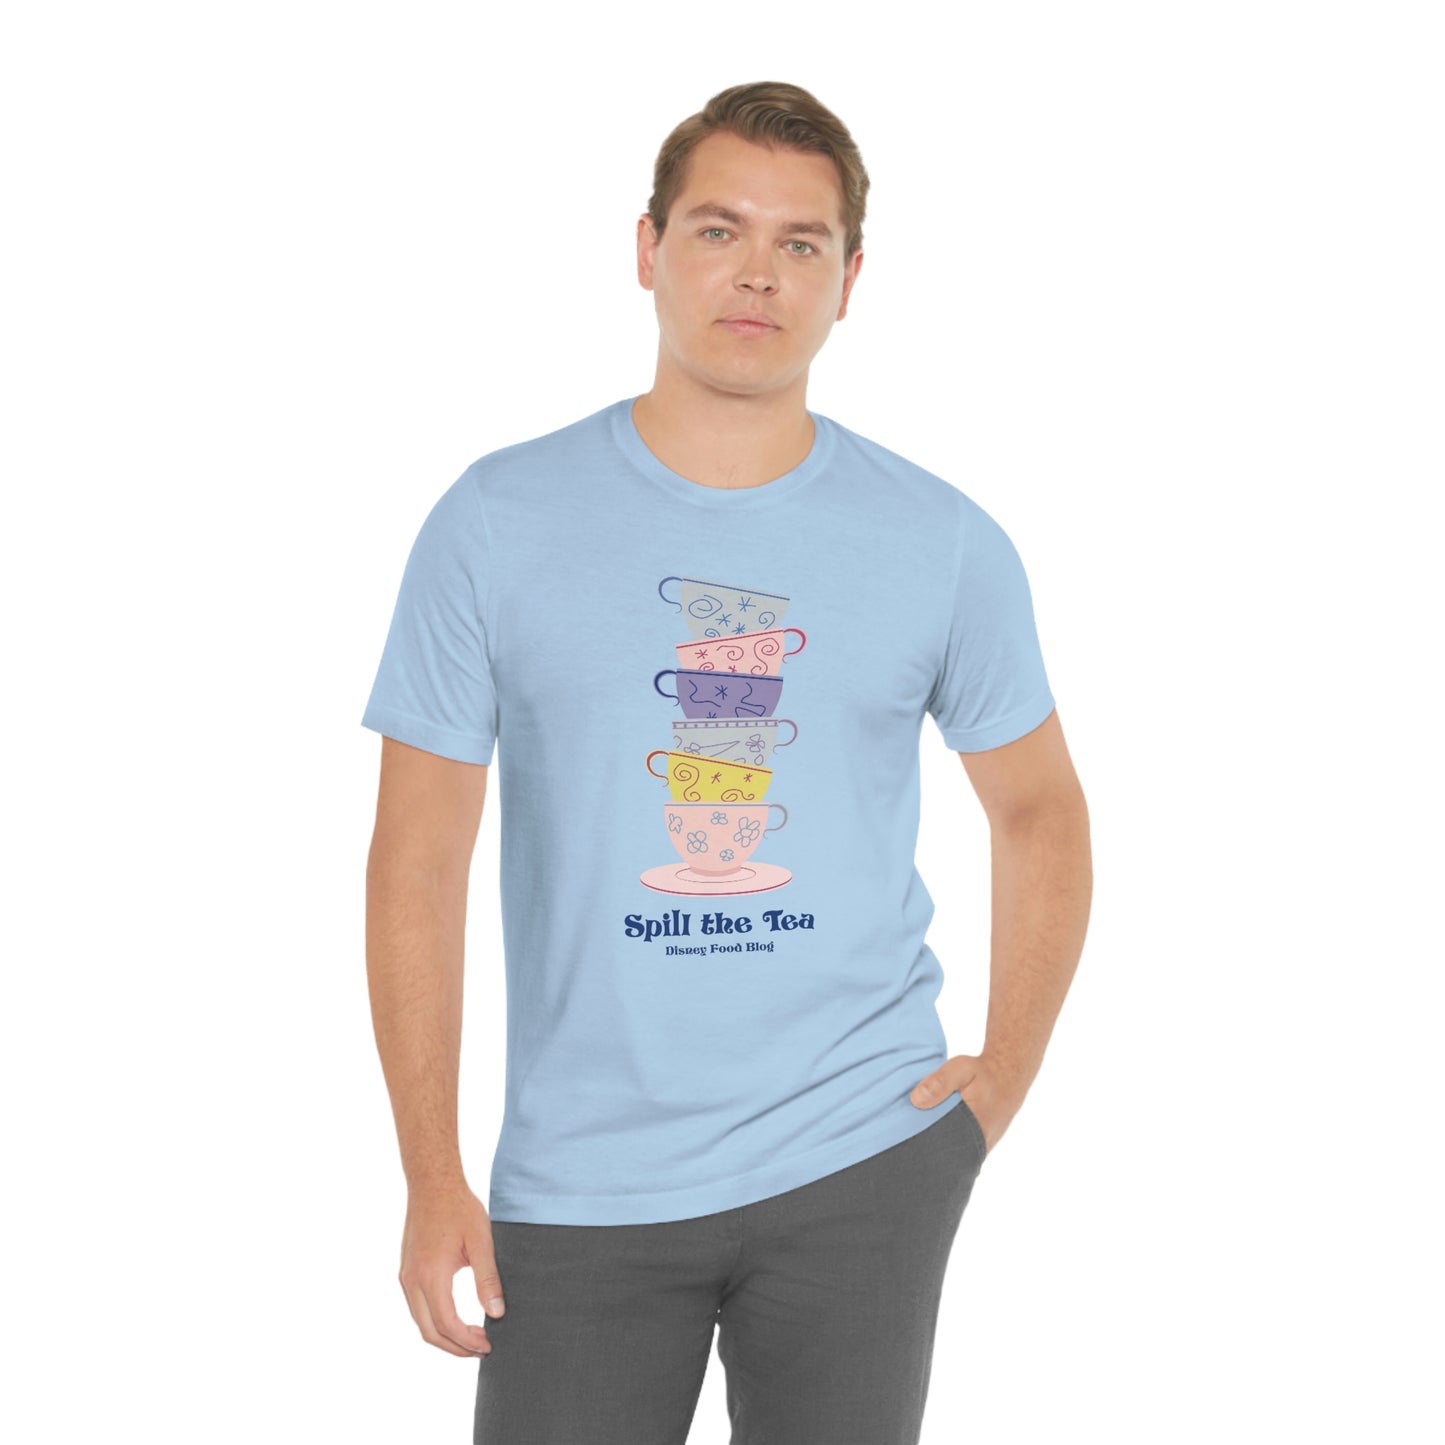 Spill the Mad Tea Party - Adult Shirt